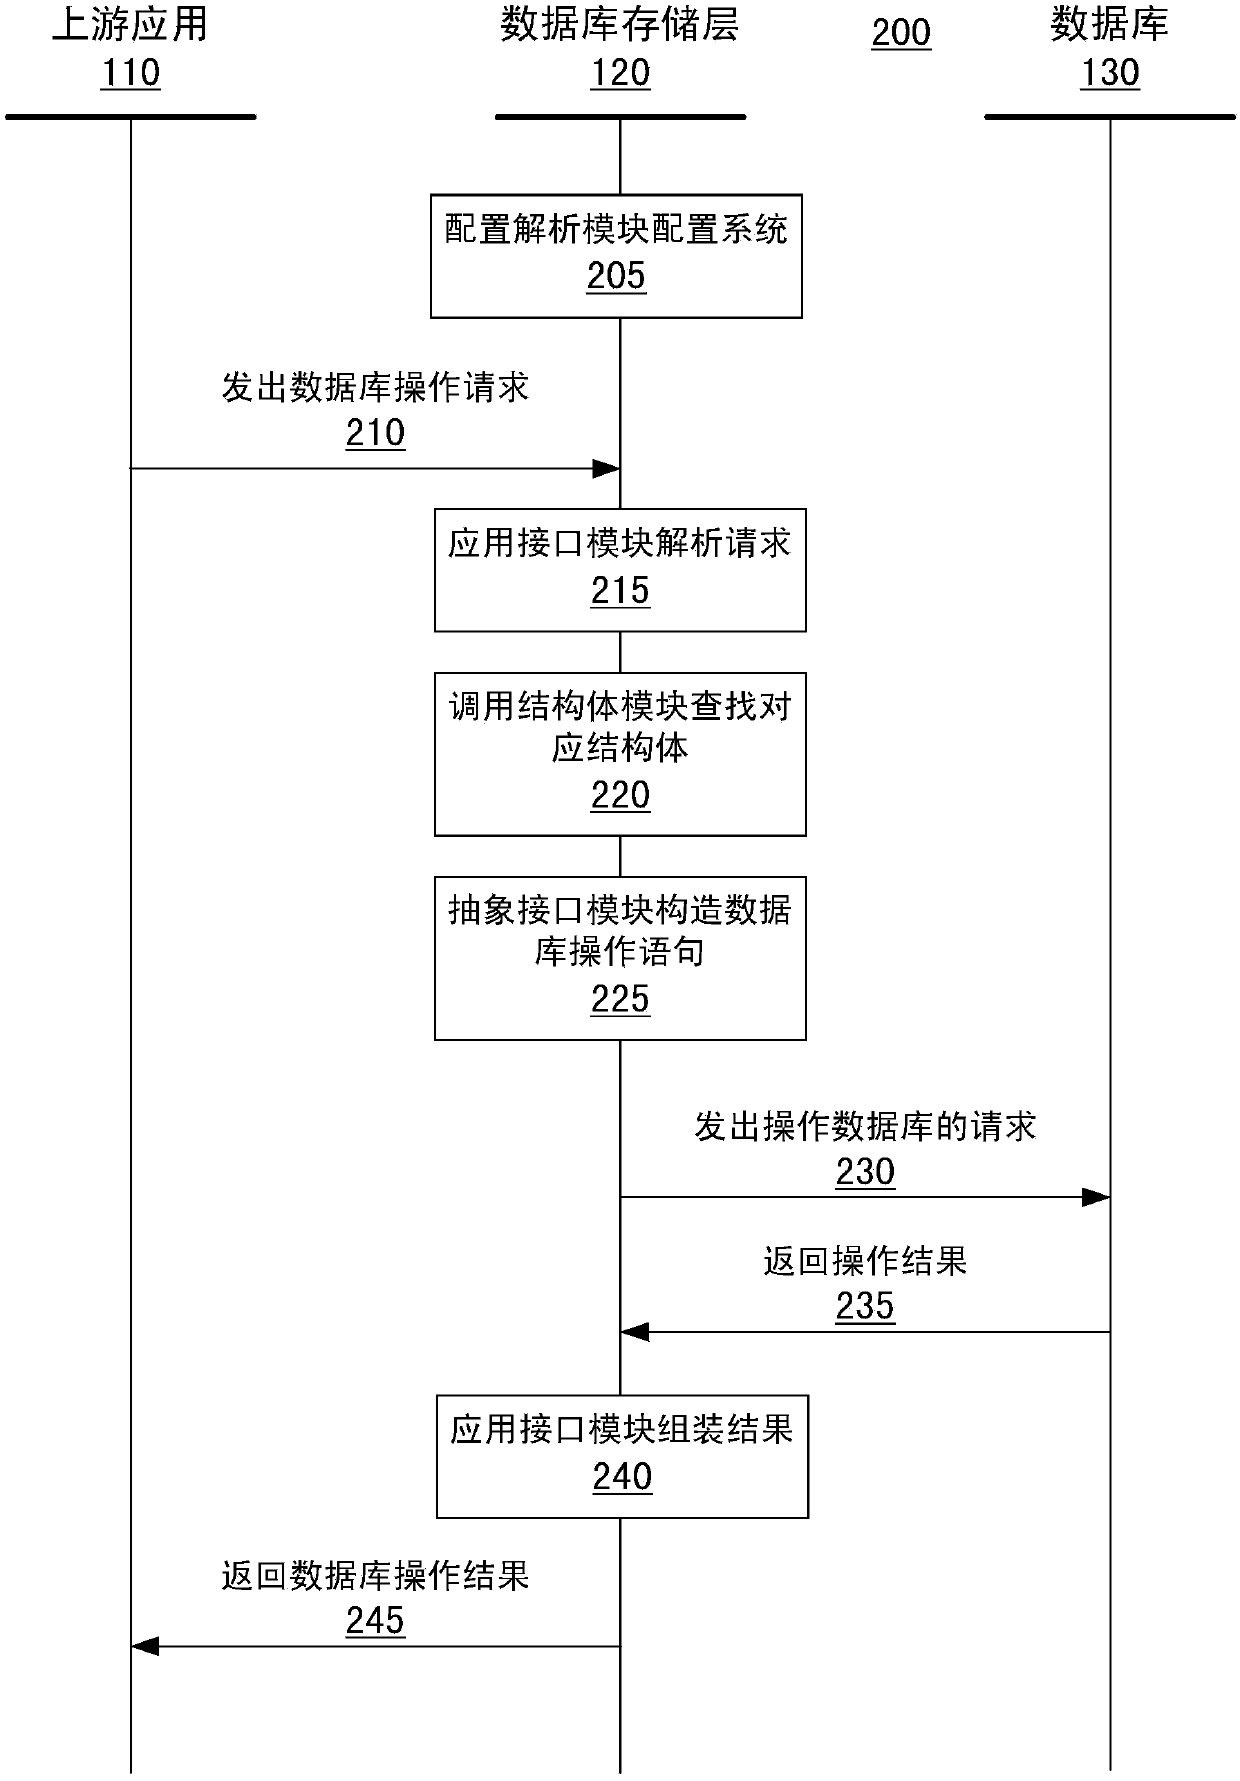 Method for accessing database by means of database storage layer used in instant communication system